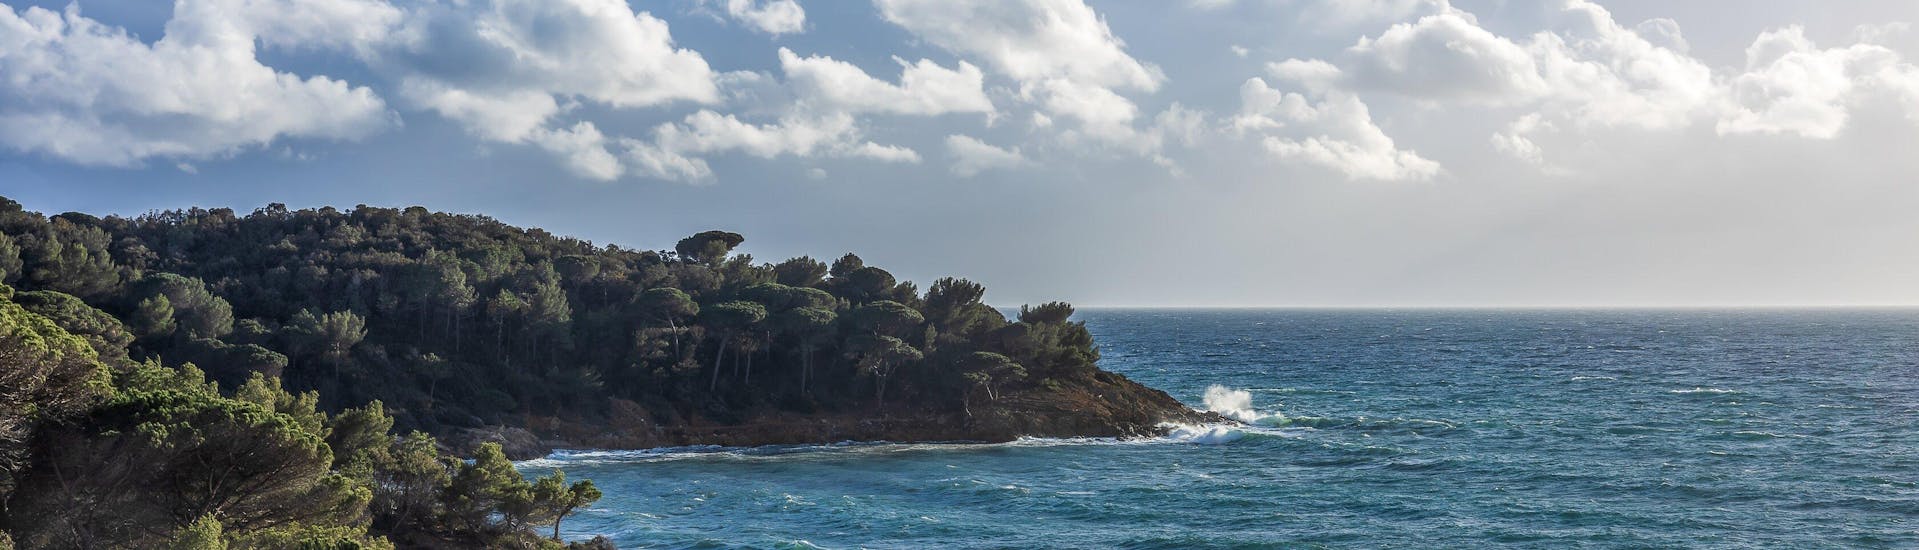 View of the coast of La Croix Valmer in France.